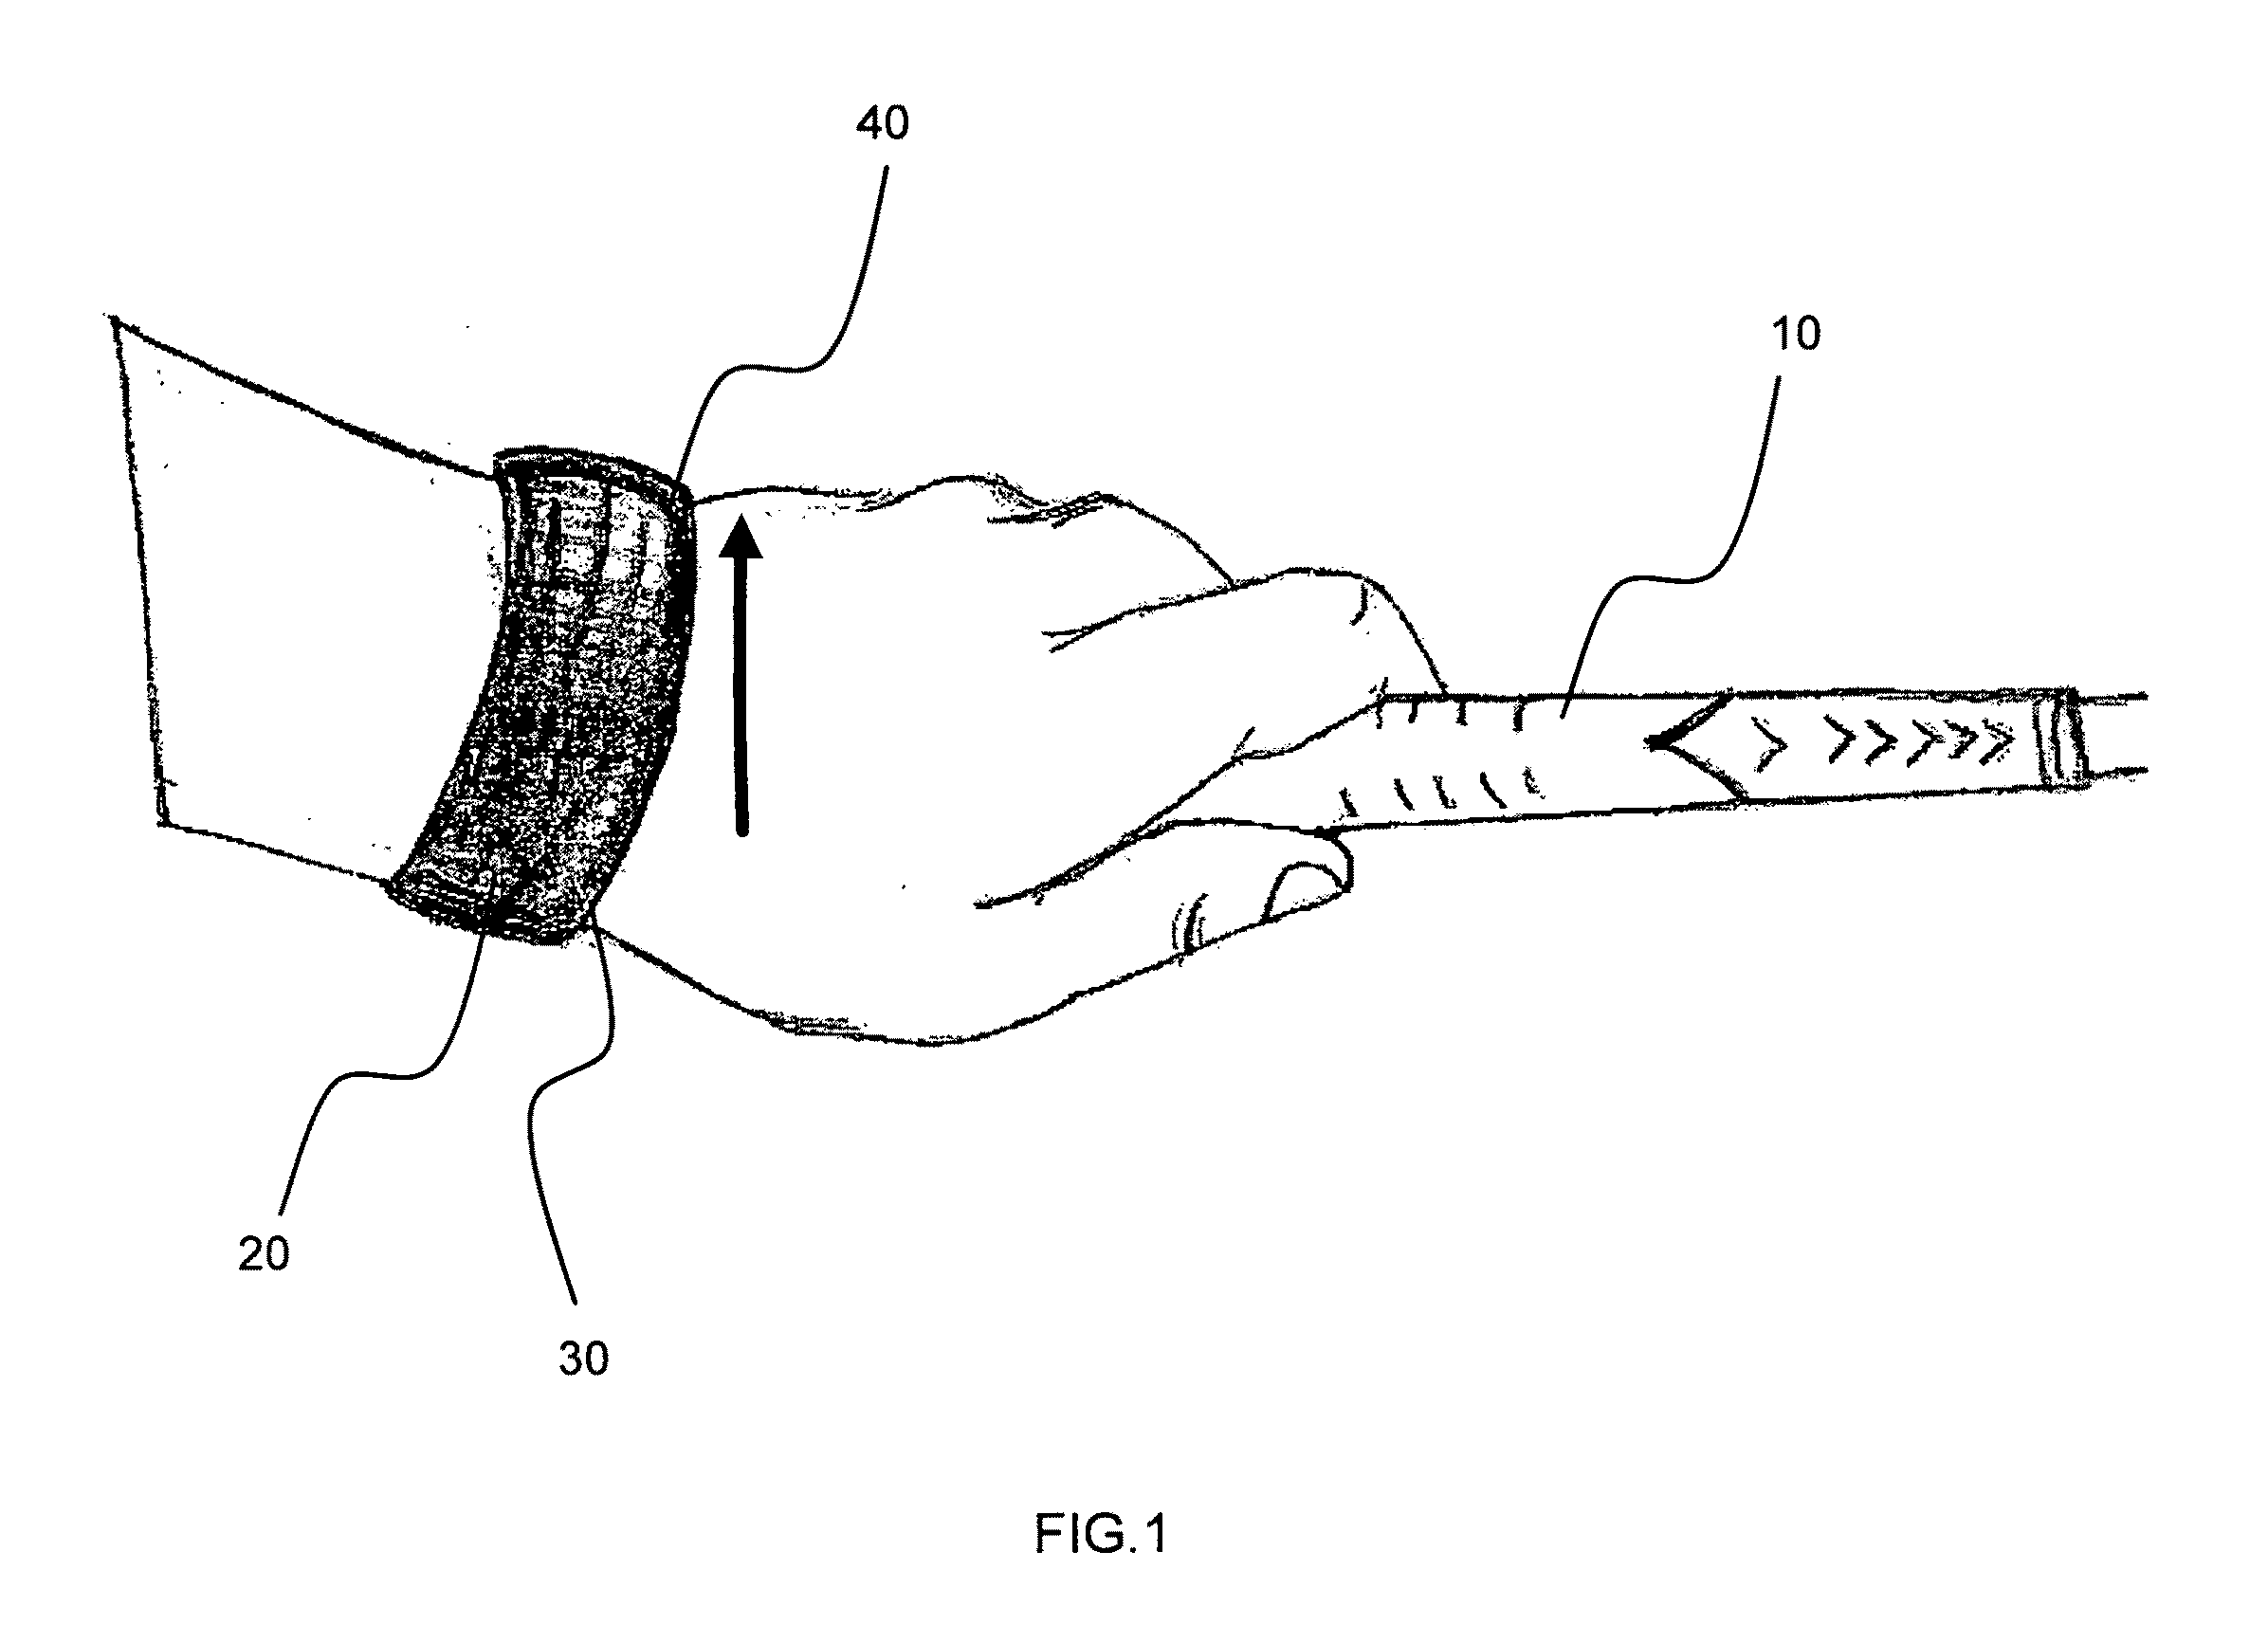 Method and apparatus of measuring and analyzing user movement